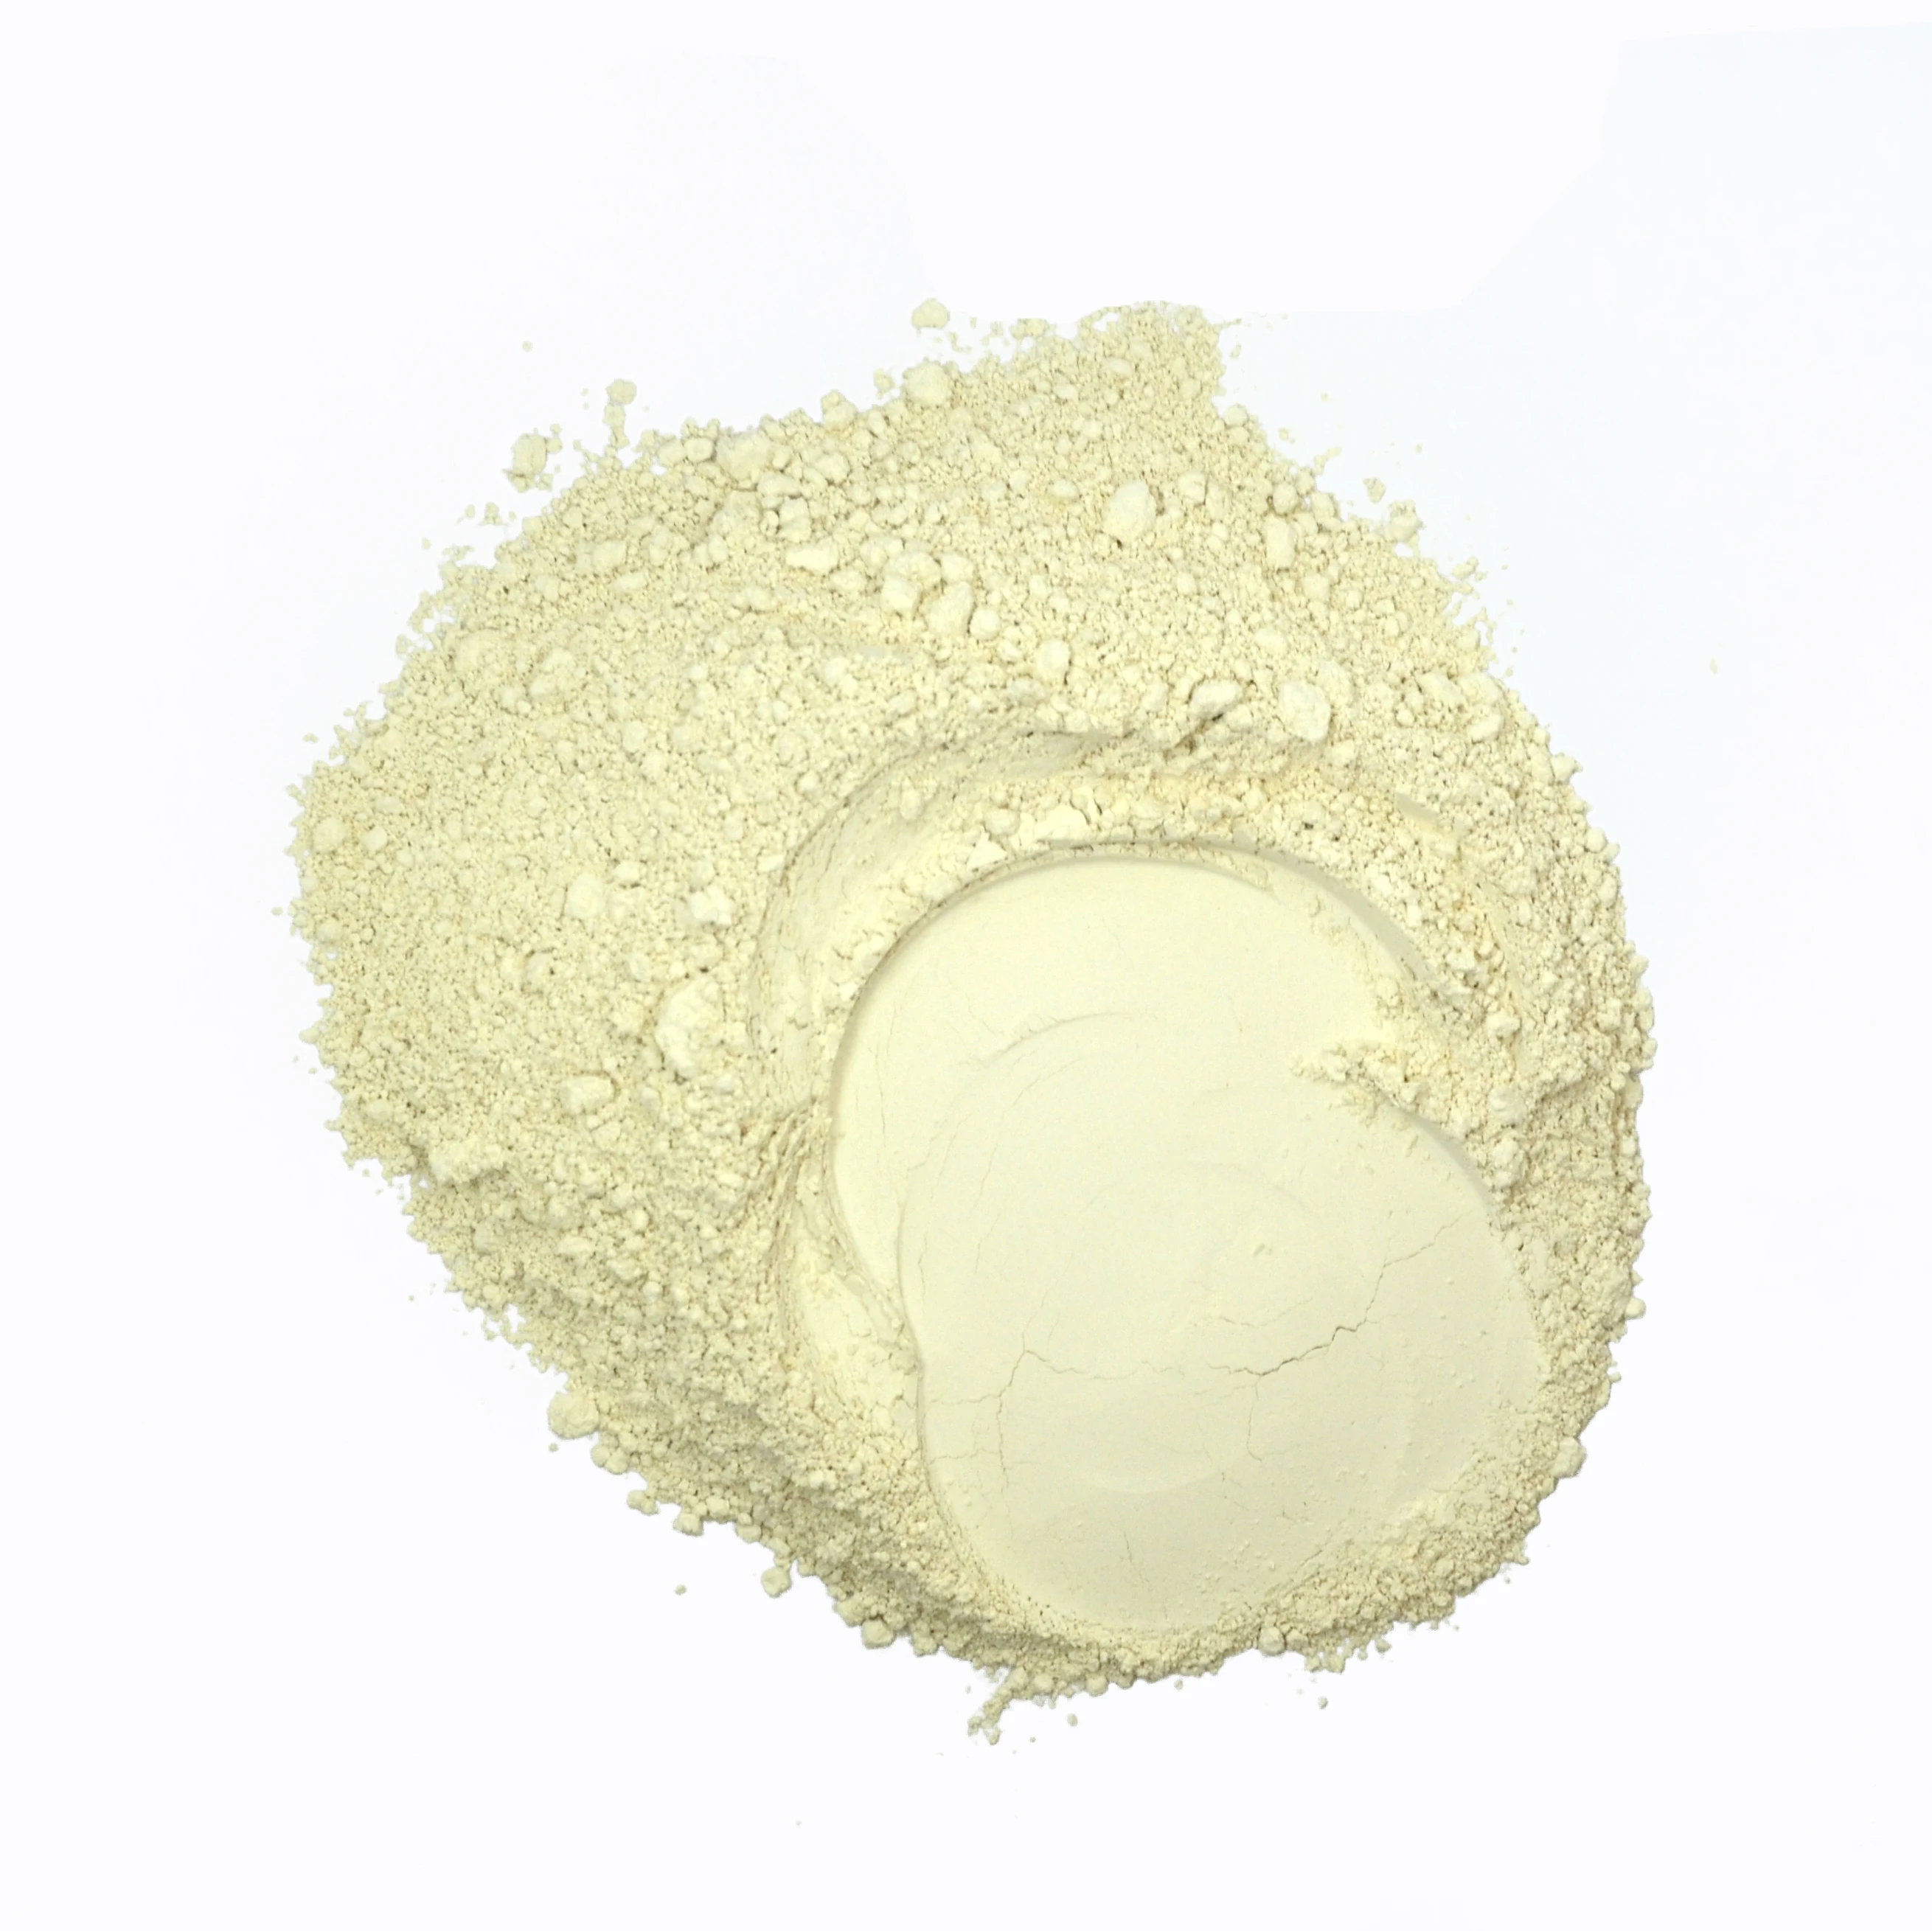 china supply calcined ceramic raw material kaolin clay cheaps price for ruber paint coatings ceramics paper